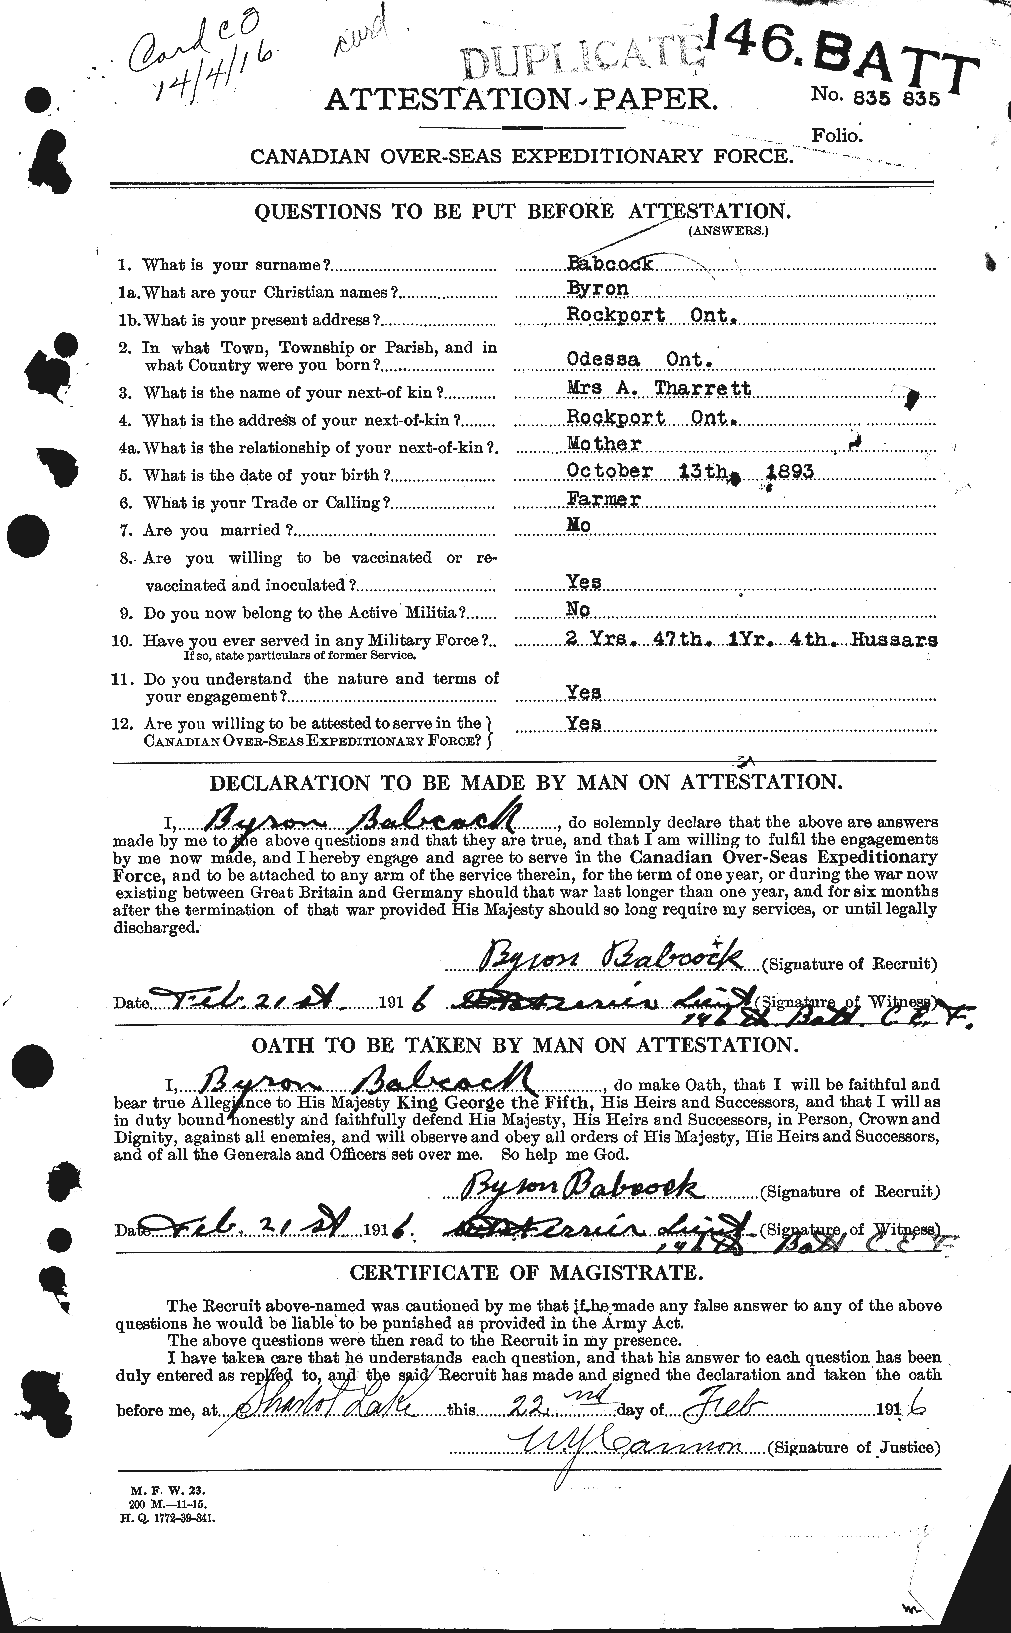 Personnel Records of the First World War - CEF 218257a